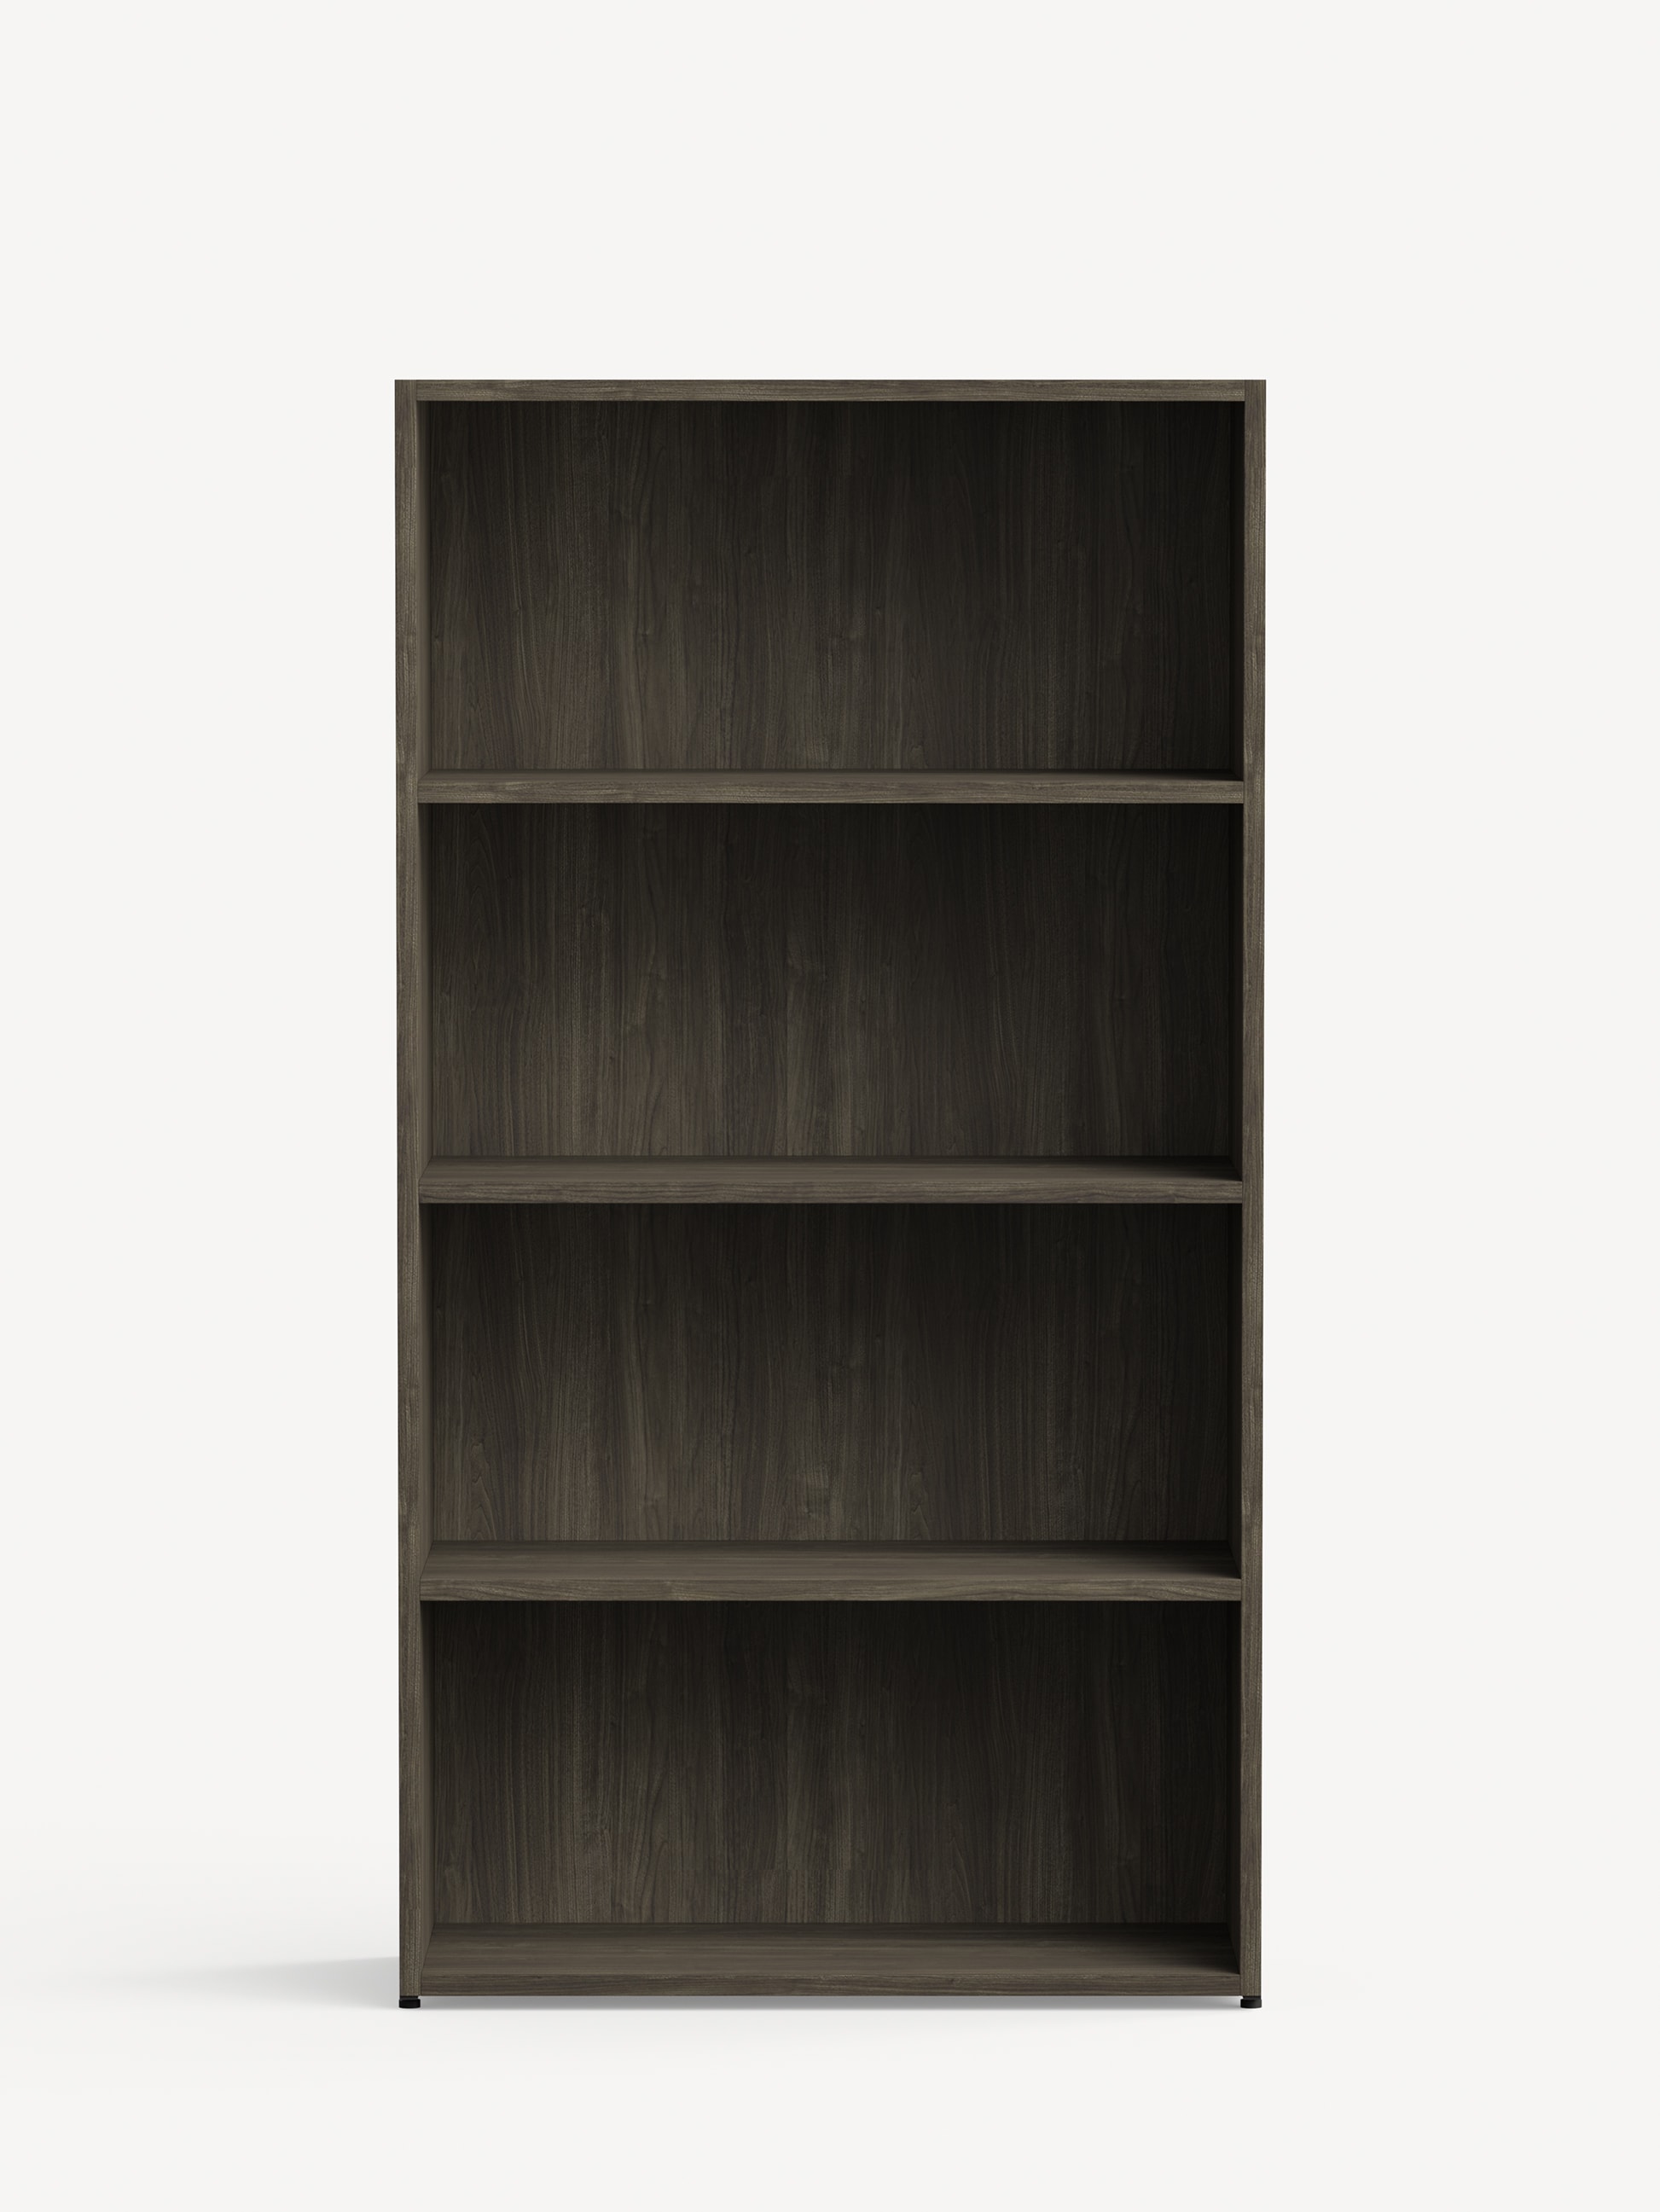 Approach Bookcase in brownish grey wood with three shelves.